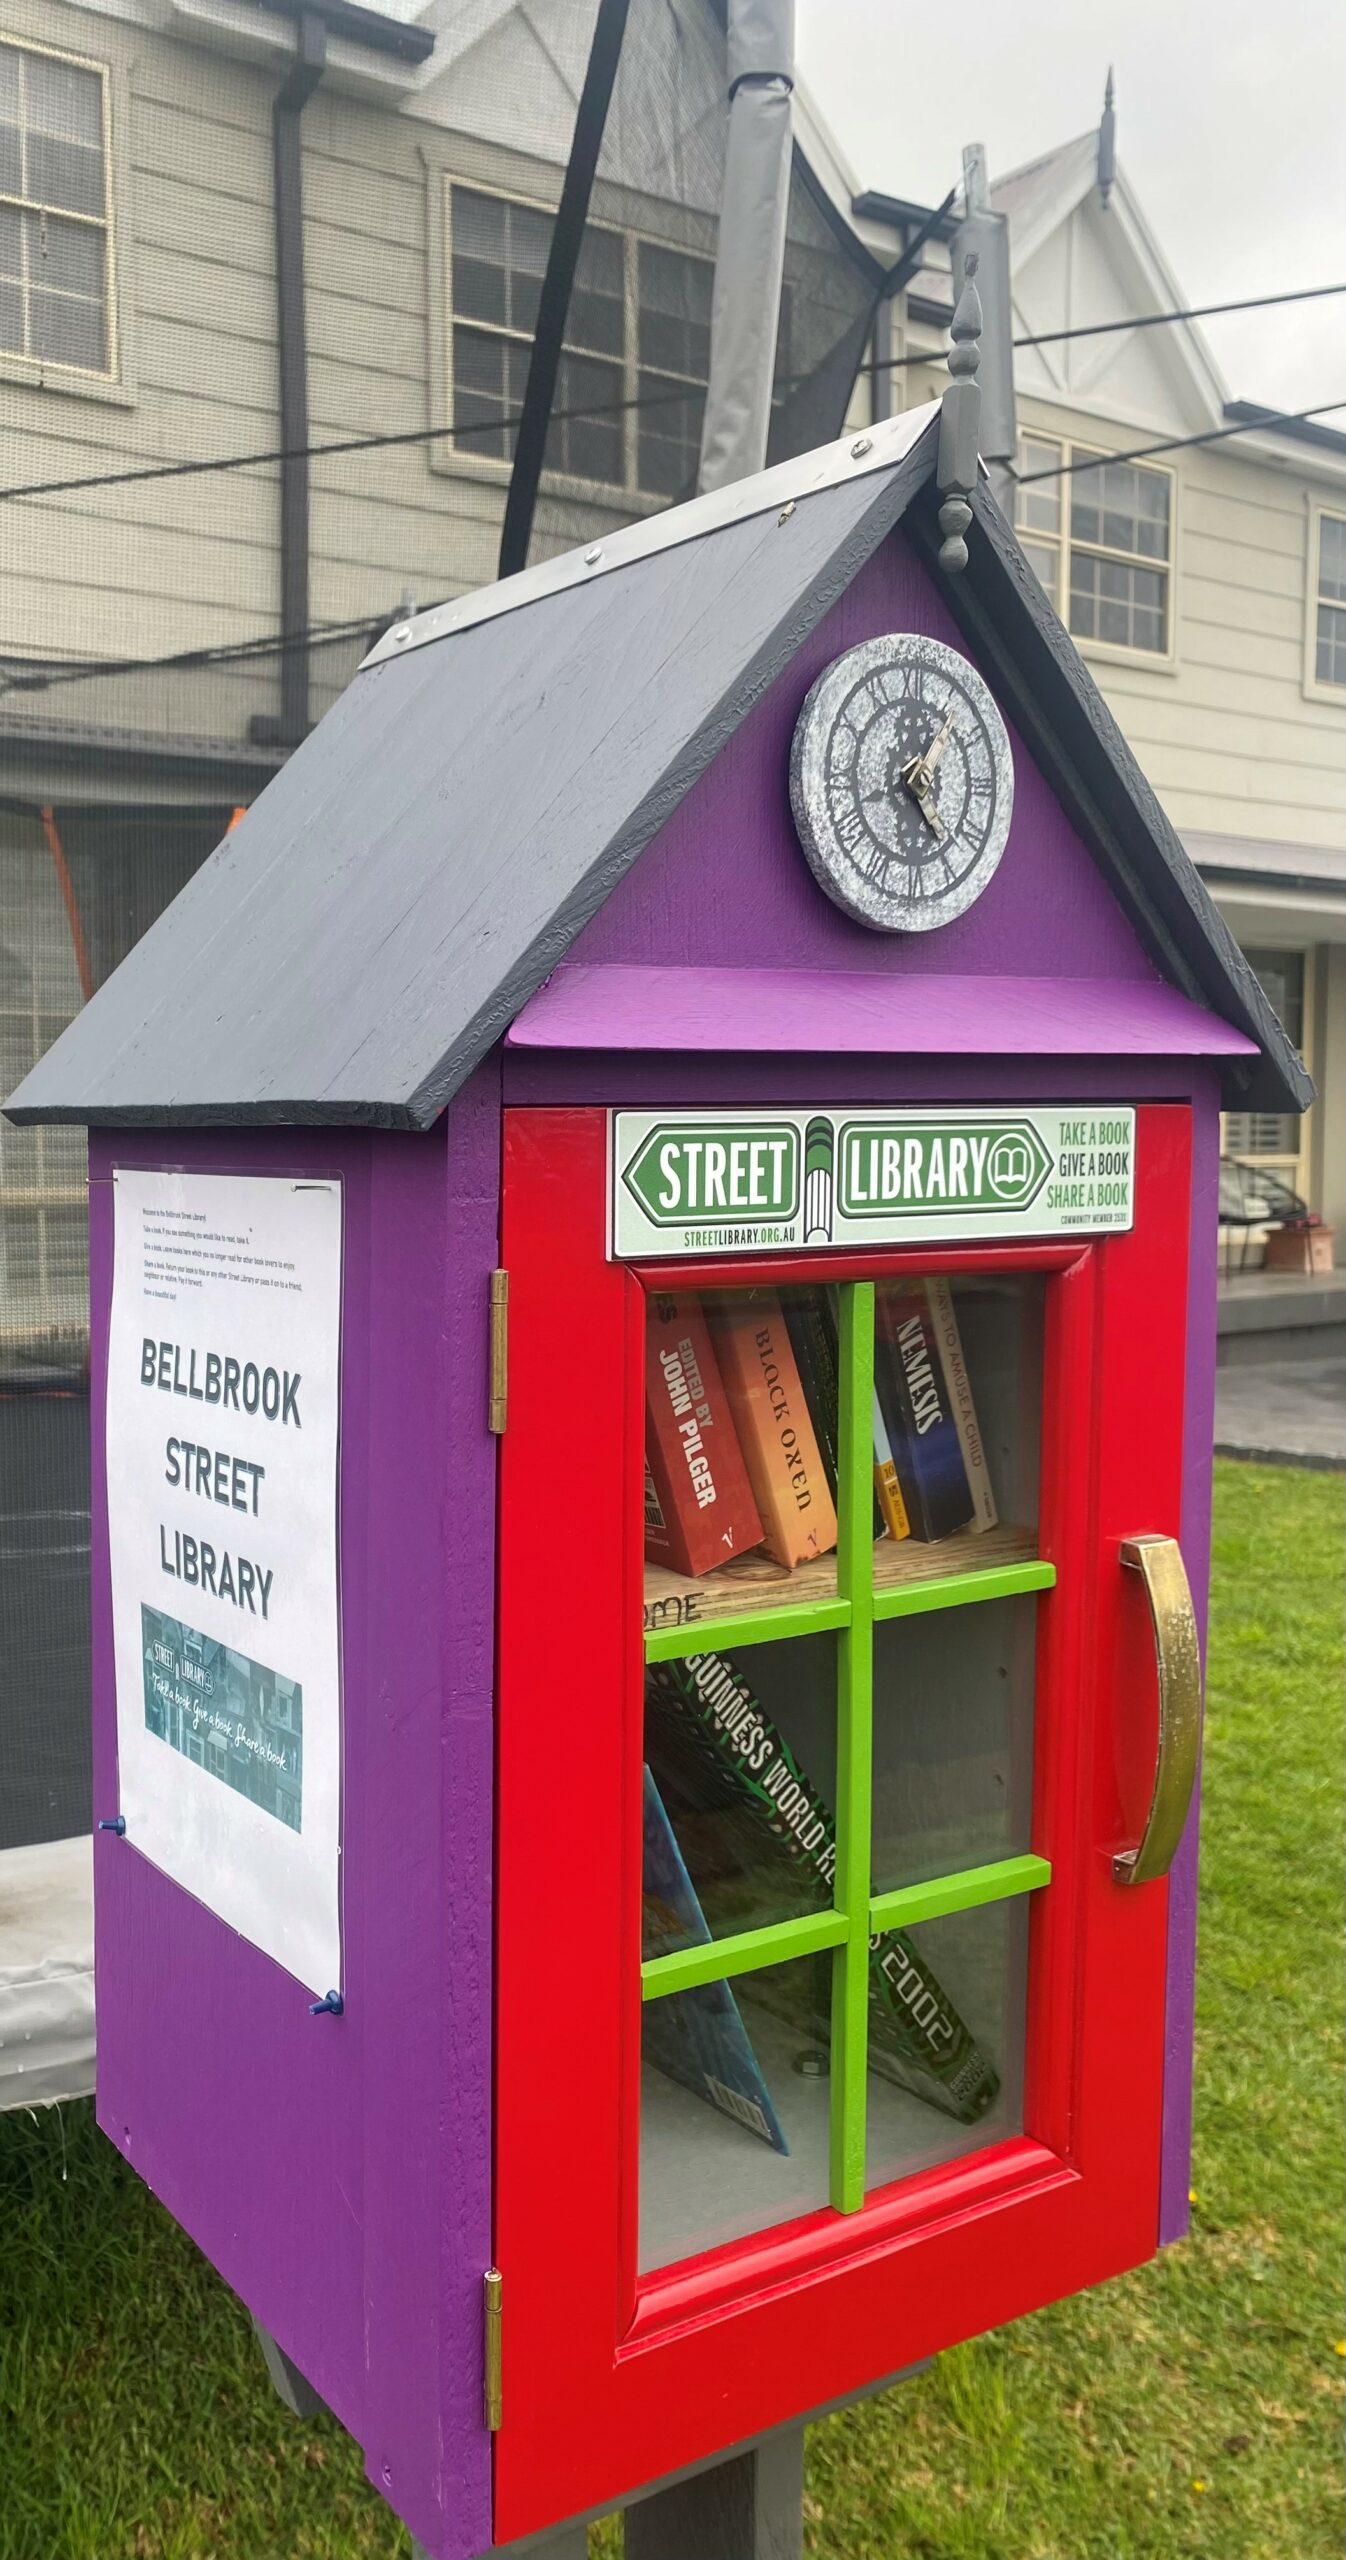 A Street Library painted in purple, red and green